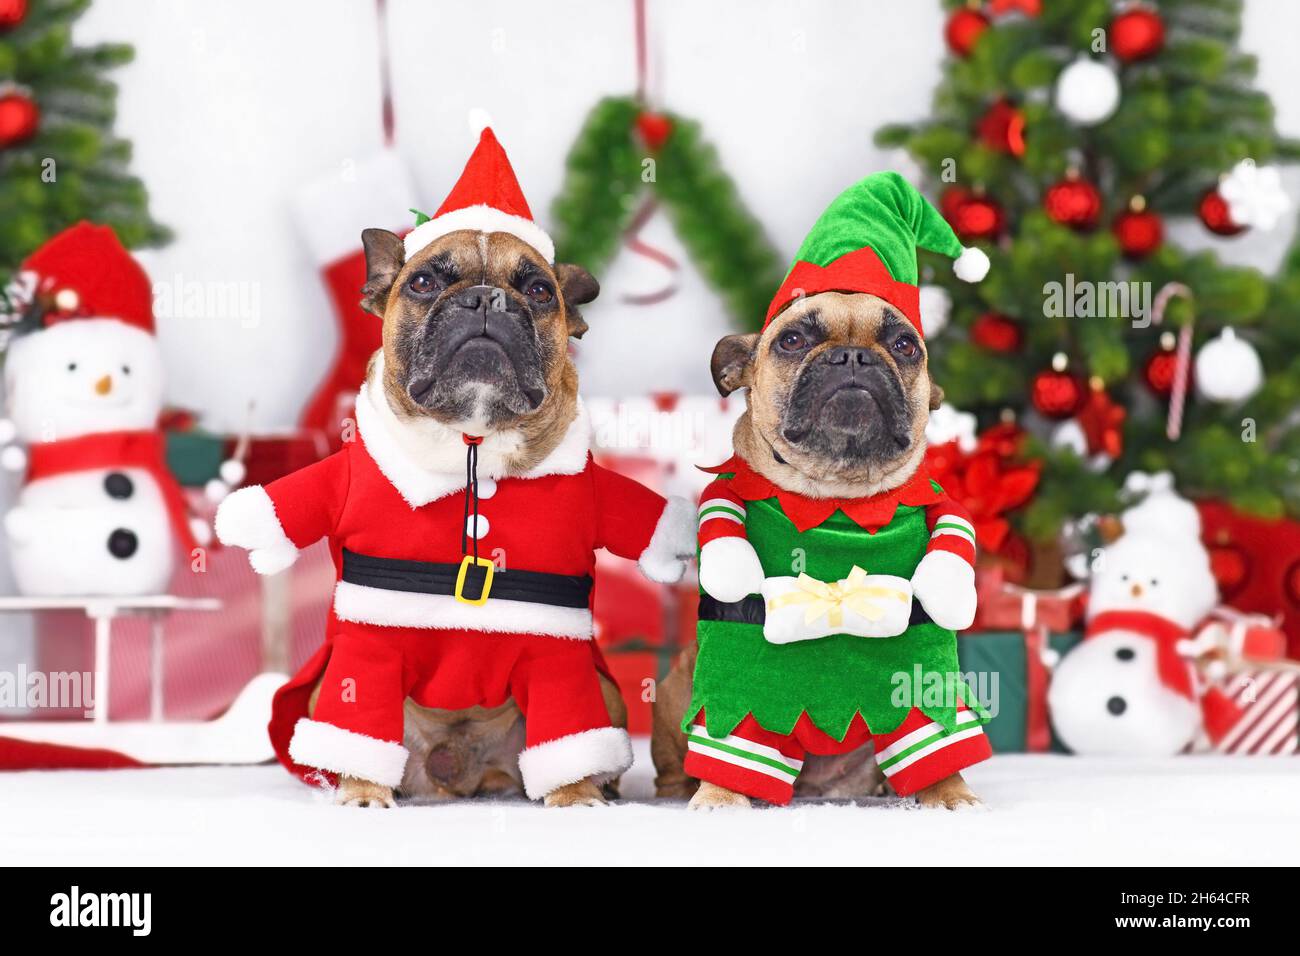 Pair of funny Christmas dogs. French Bulldogs wearing Christmas costumes dressed up as Christmas elf and Santa Claus Stock Photo